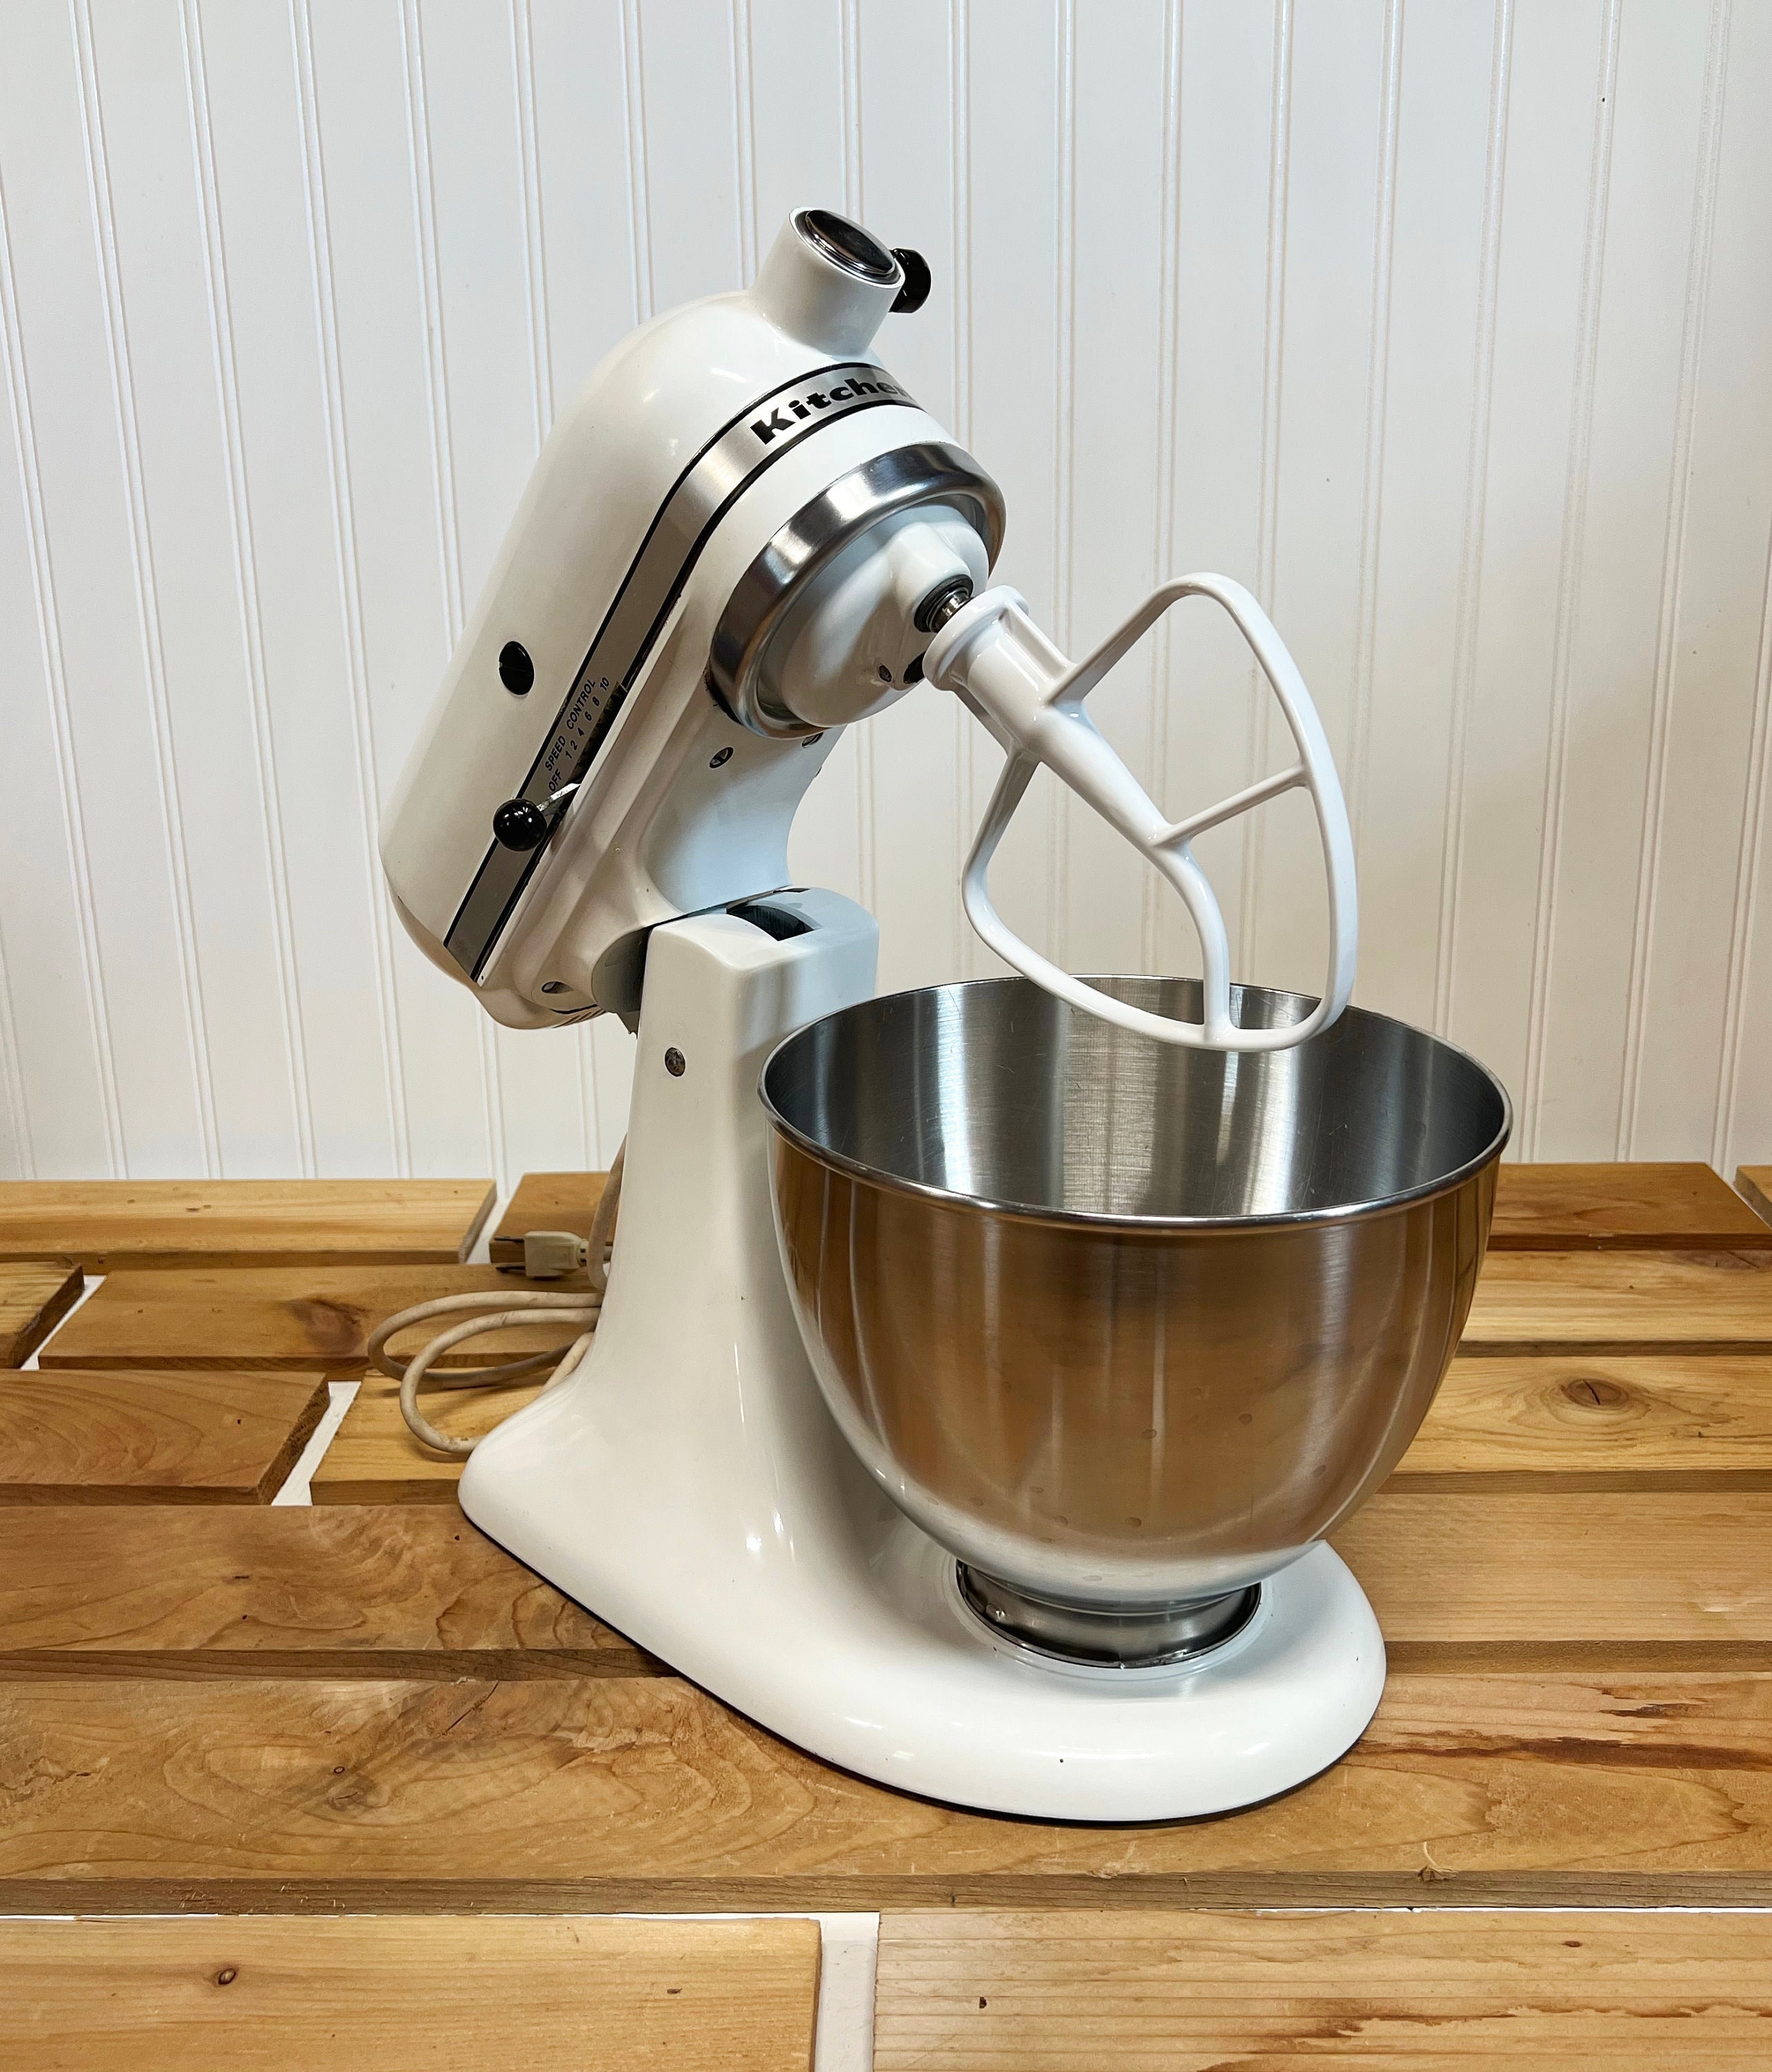 Kaslove 13 Inch Danish Dough Whisk Mixer Blender and Hand Mixer Kitchenware  Tool Cake Dessert Bread Baking Pizza Pastry Food Mixer or Hook 